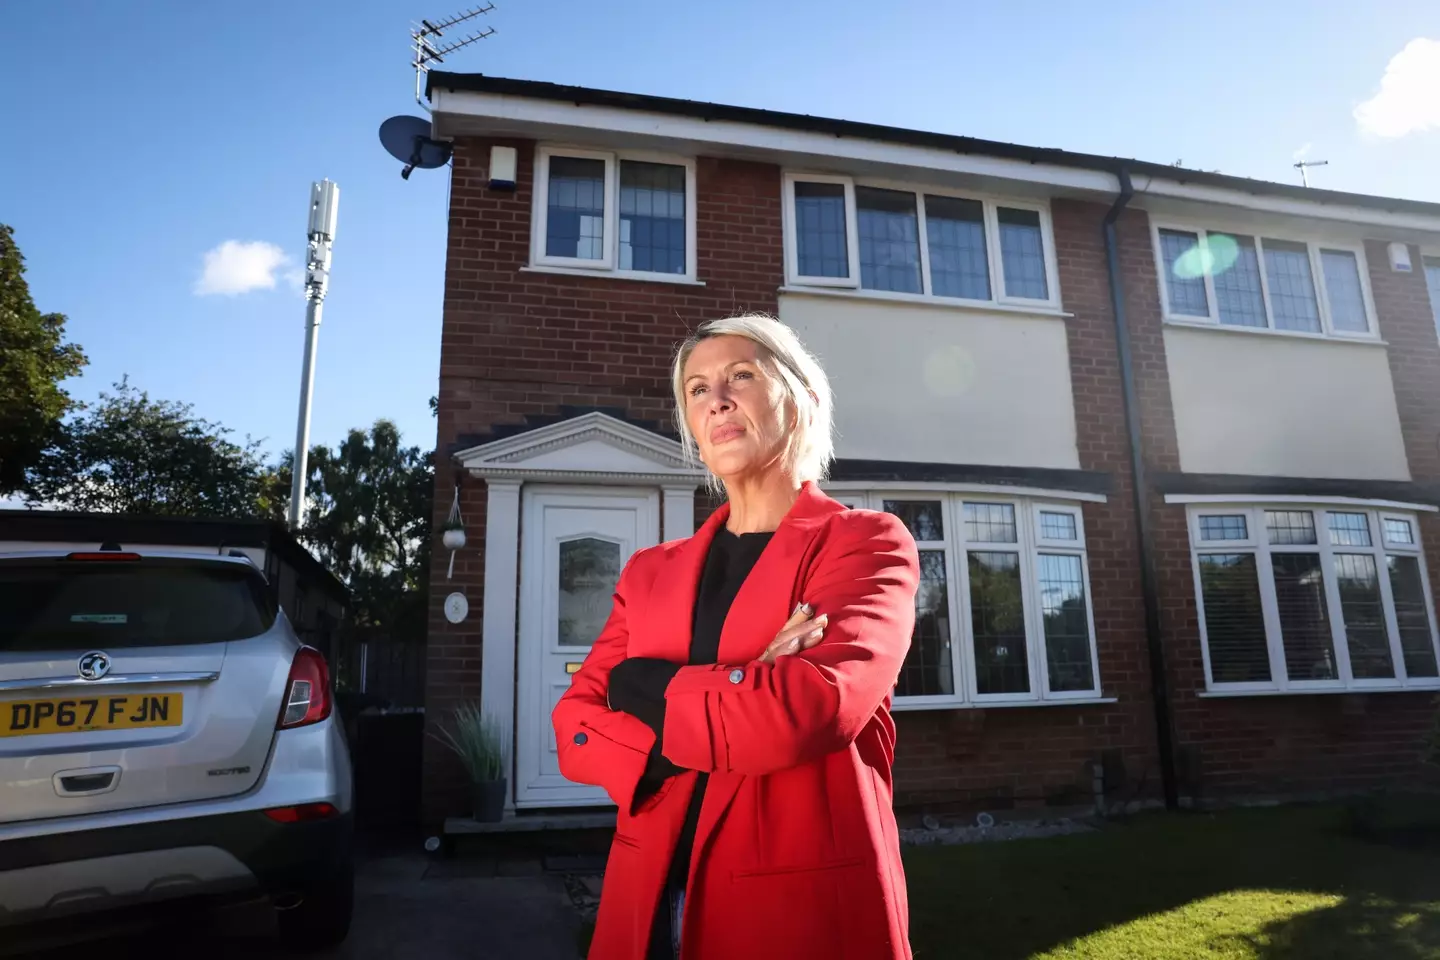 A new 5G mast has angered residents on a street in Rochdale.